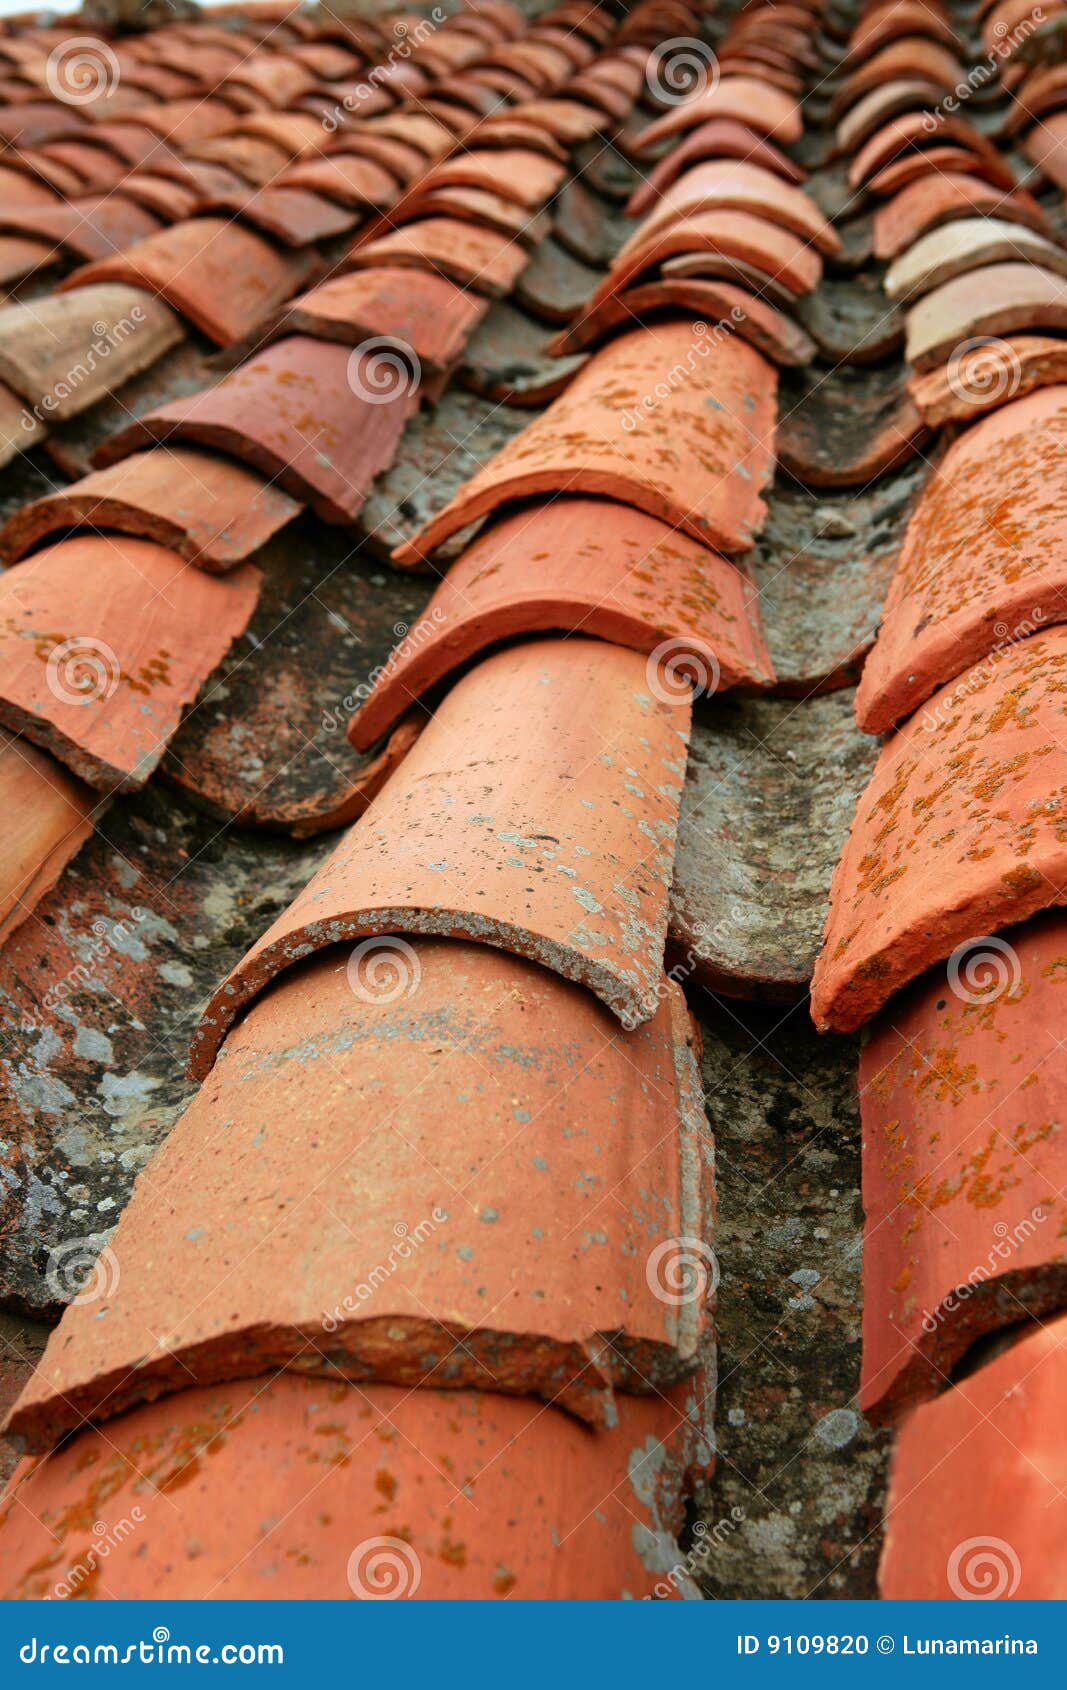 Aged Old Red Clay Arabic Roof Tiles Stock Photo - Image: 9109820